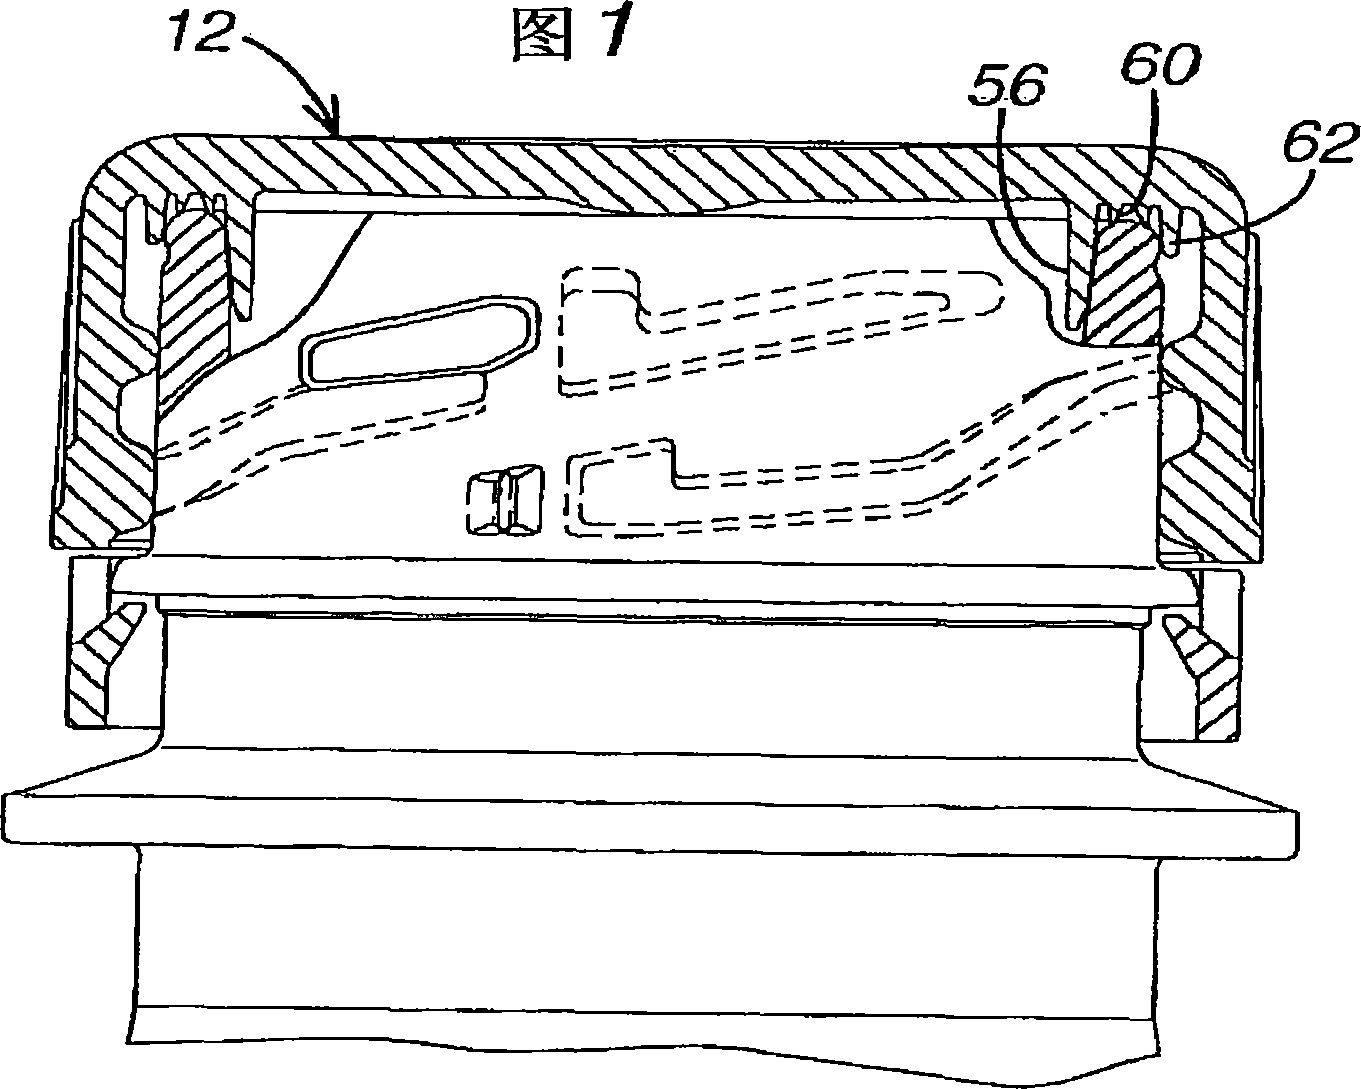 Bottle and closure assembly with locking elements